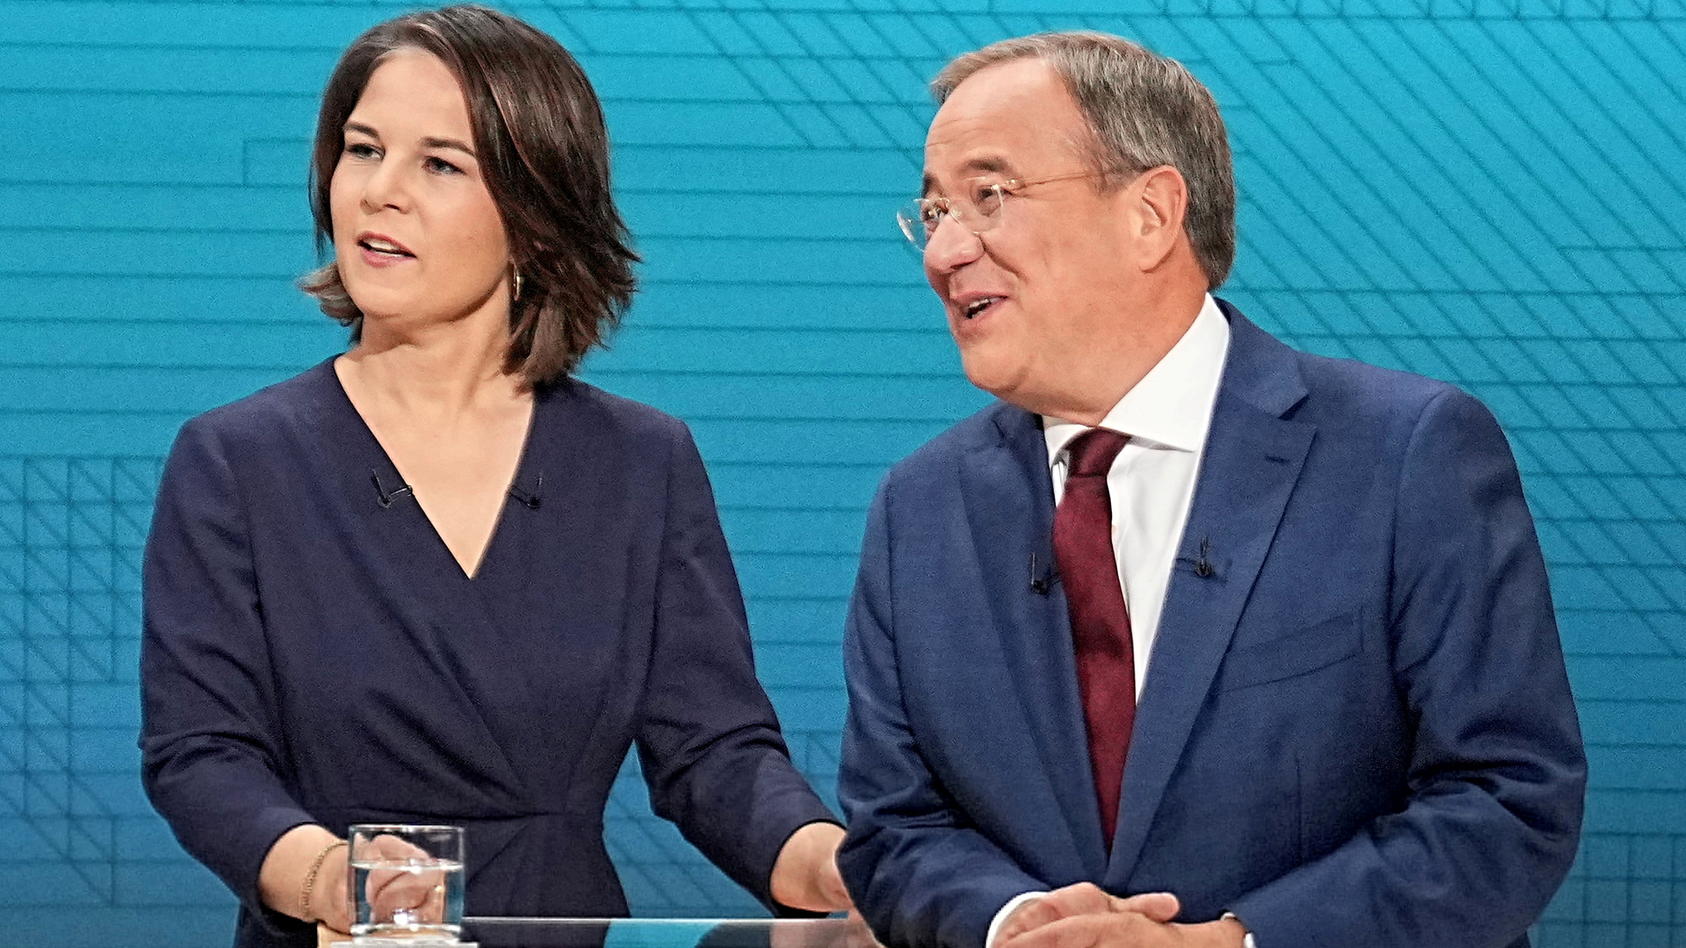 FILE PHOTO: Chairwoman of Buendnis 90/Die Gruenen Annalena Baerbock, Prime Minister of North Rhine-Westphalia (NRW) and leader of the Christian Democratic Union (CDU) Armin Laschet and German Finance Minister and Social Democratic Party candidate Ola